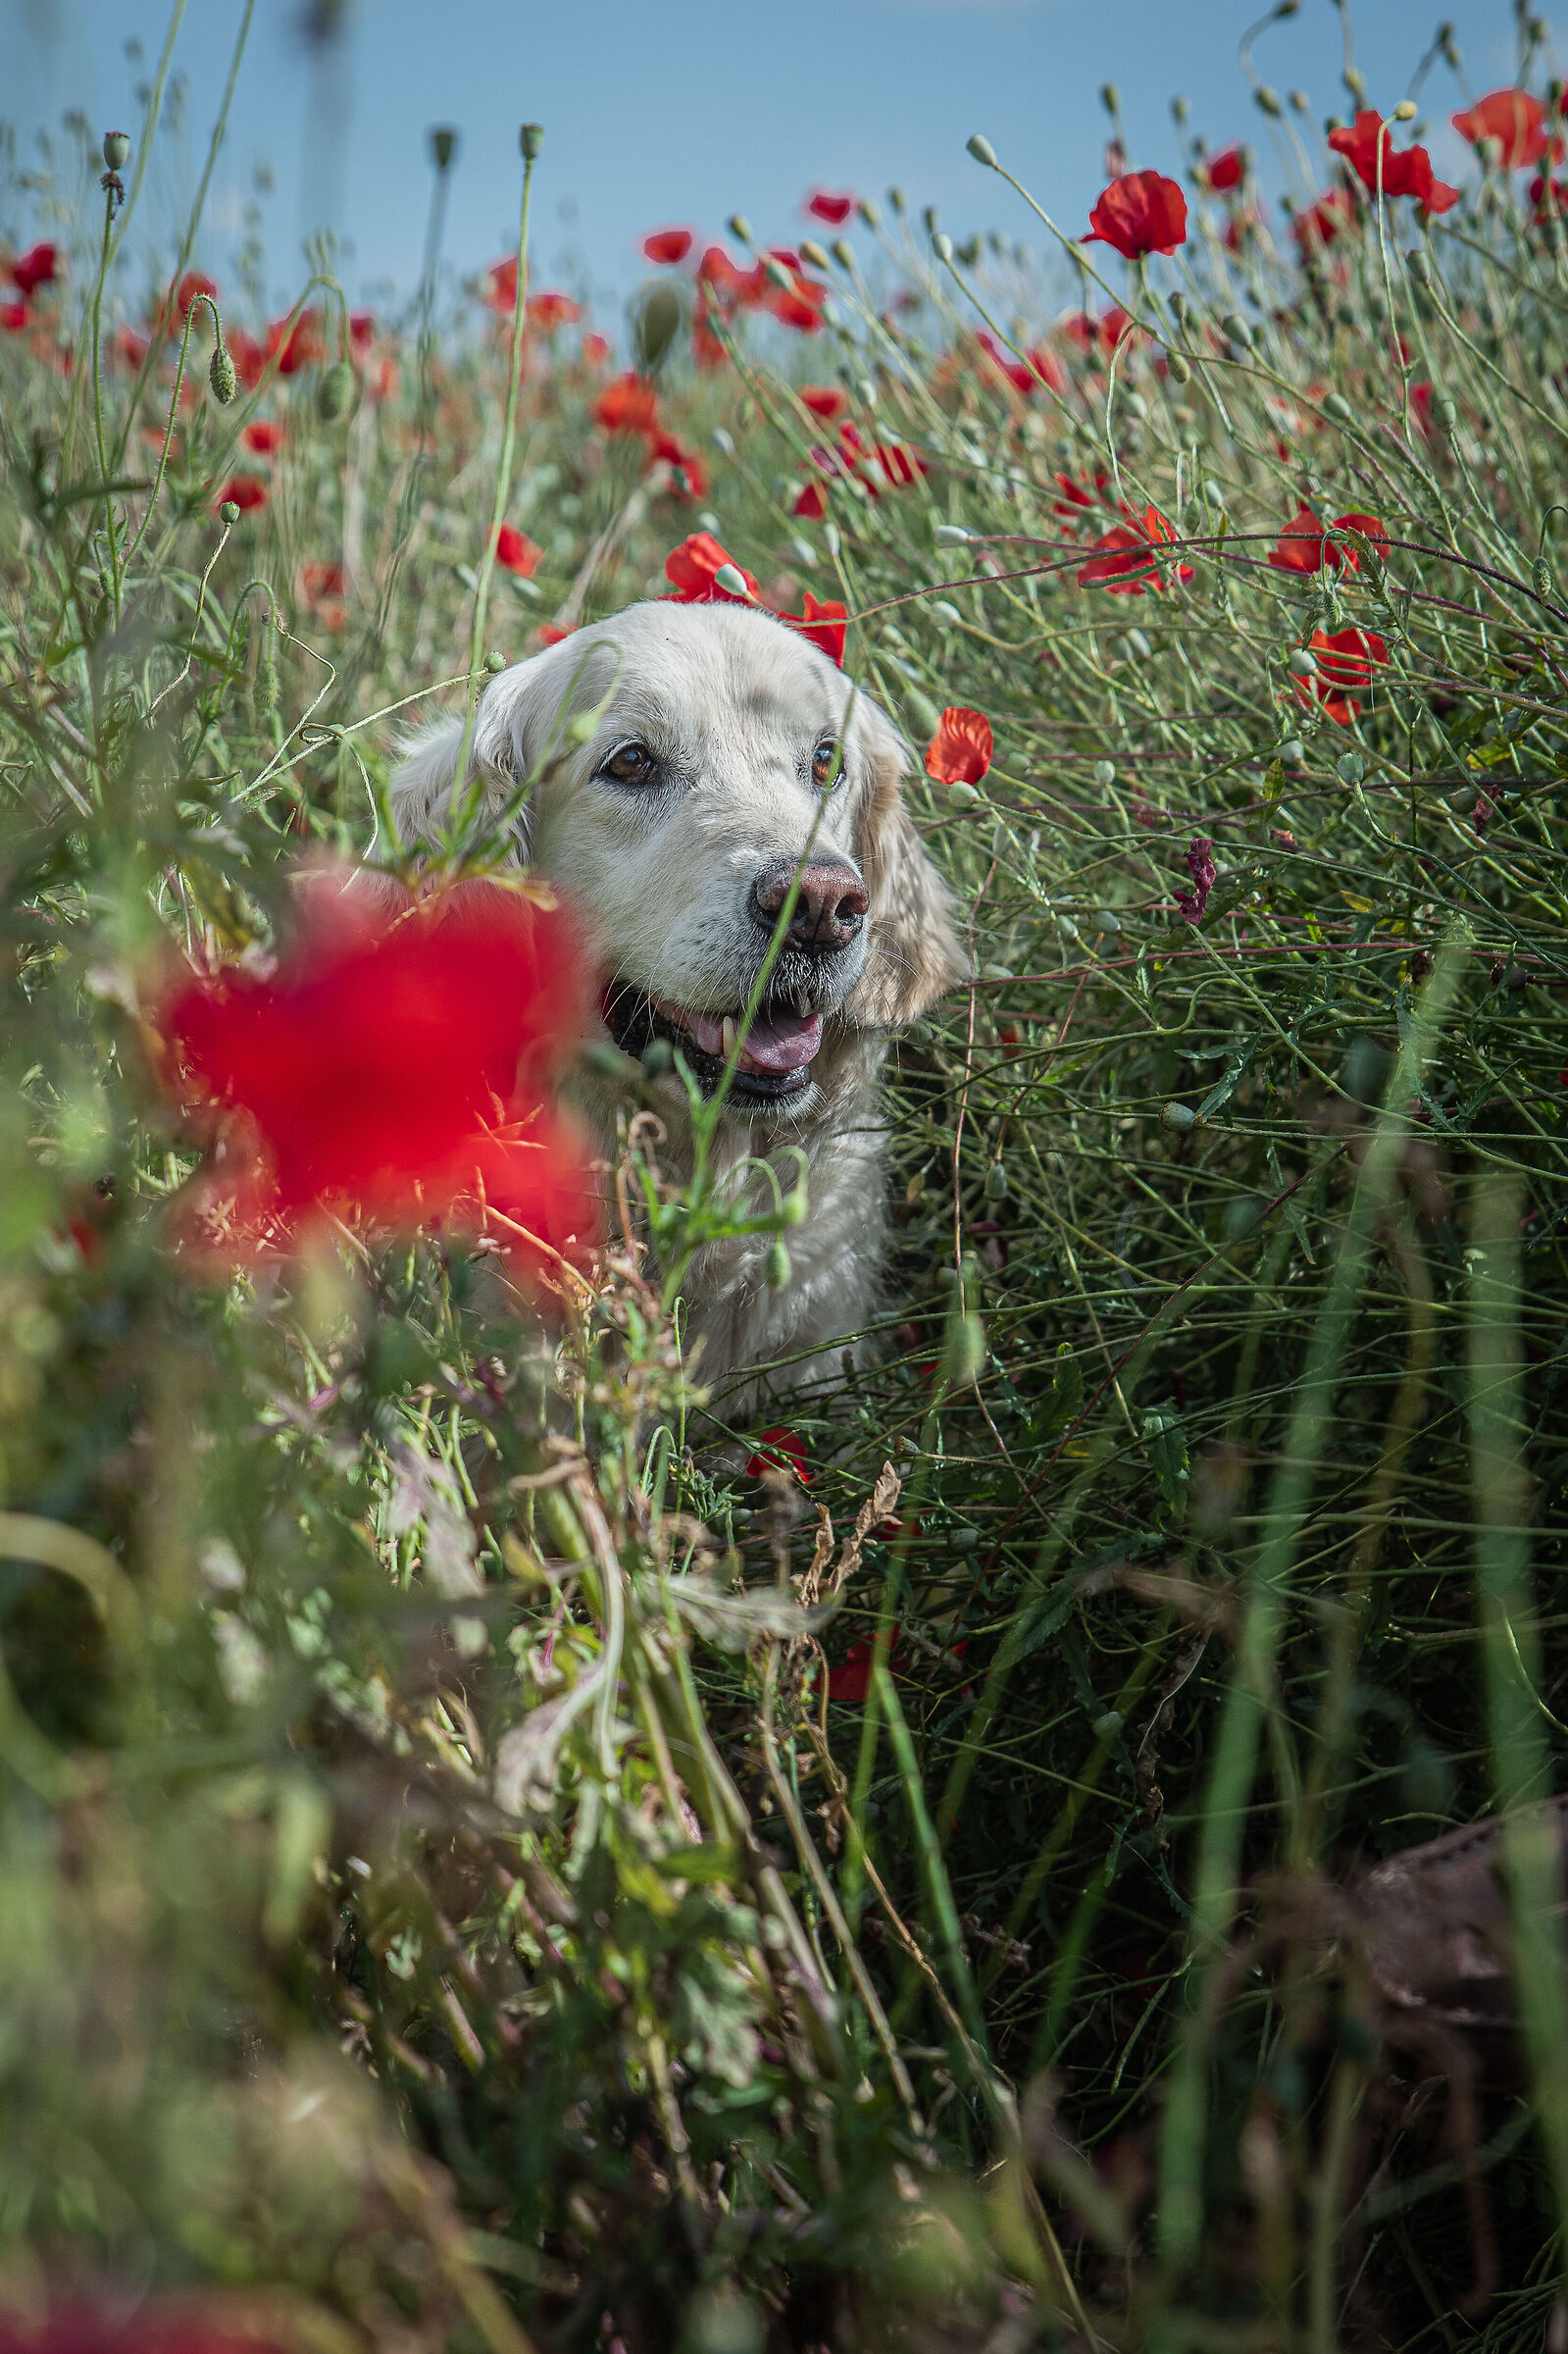 IN THE poppies...